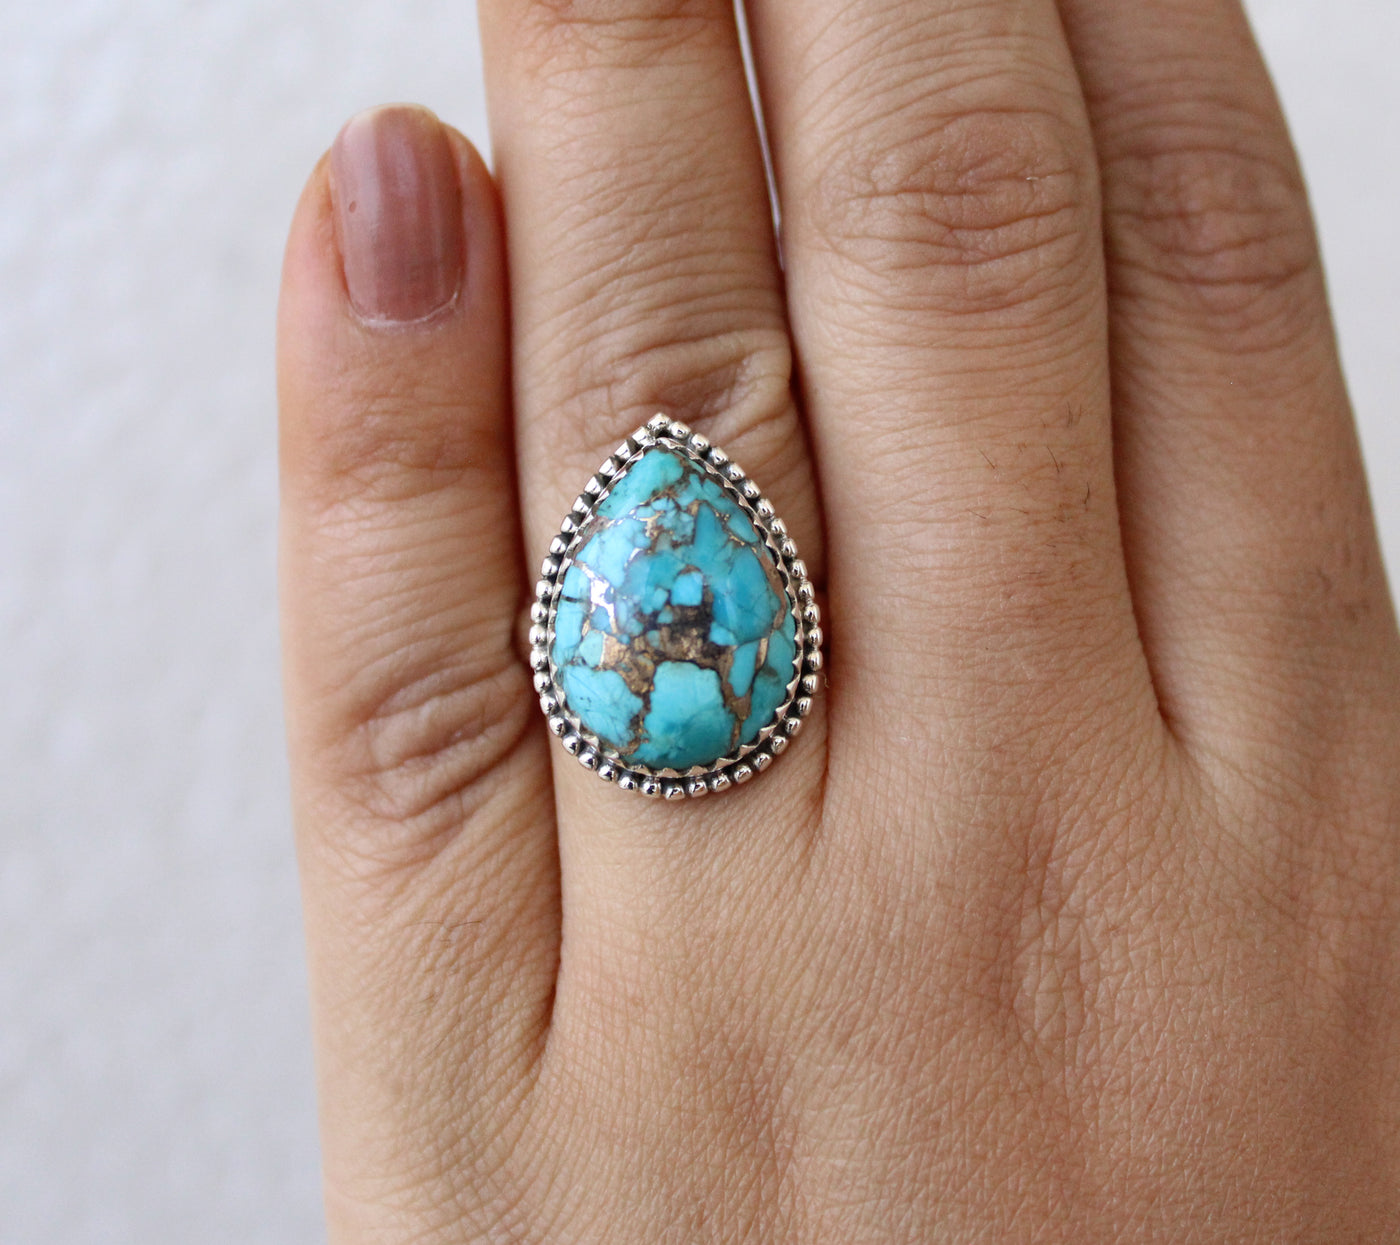 Copper Turquoise Ring, Handmade Silver Ring, 925 Sterling Silver Ring, Tear Drop Blue Copper Turquoise Ring,December Birthstone,Promise Ring